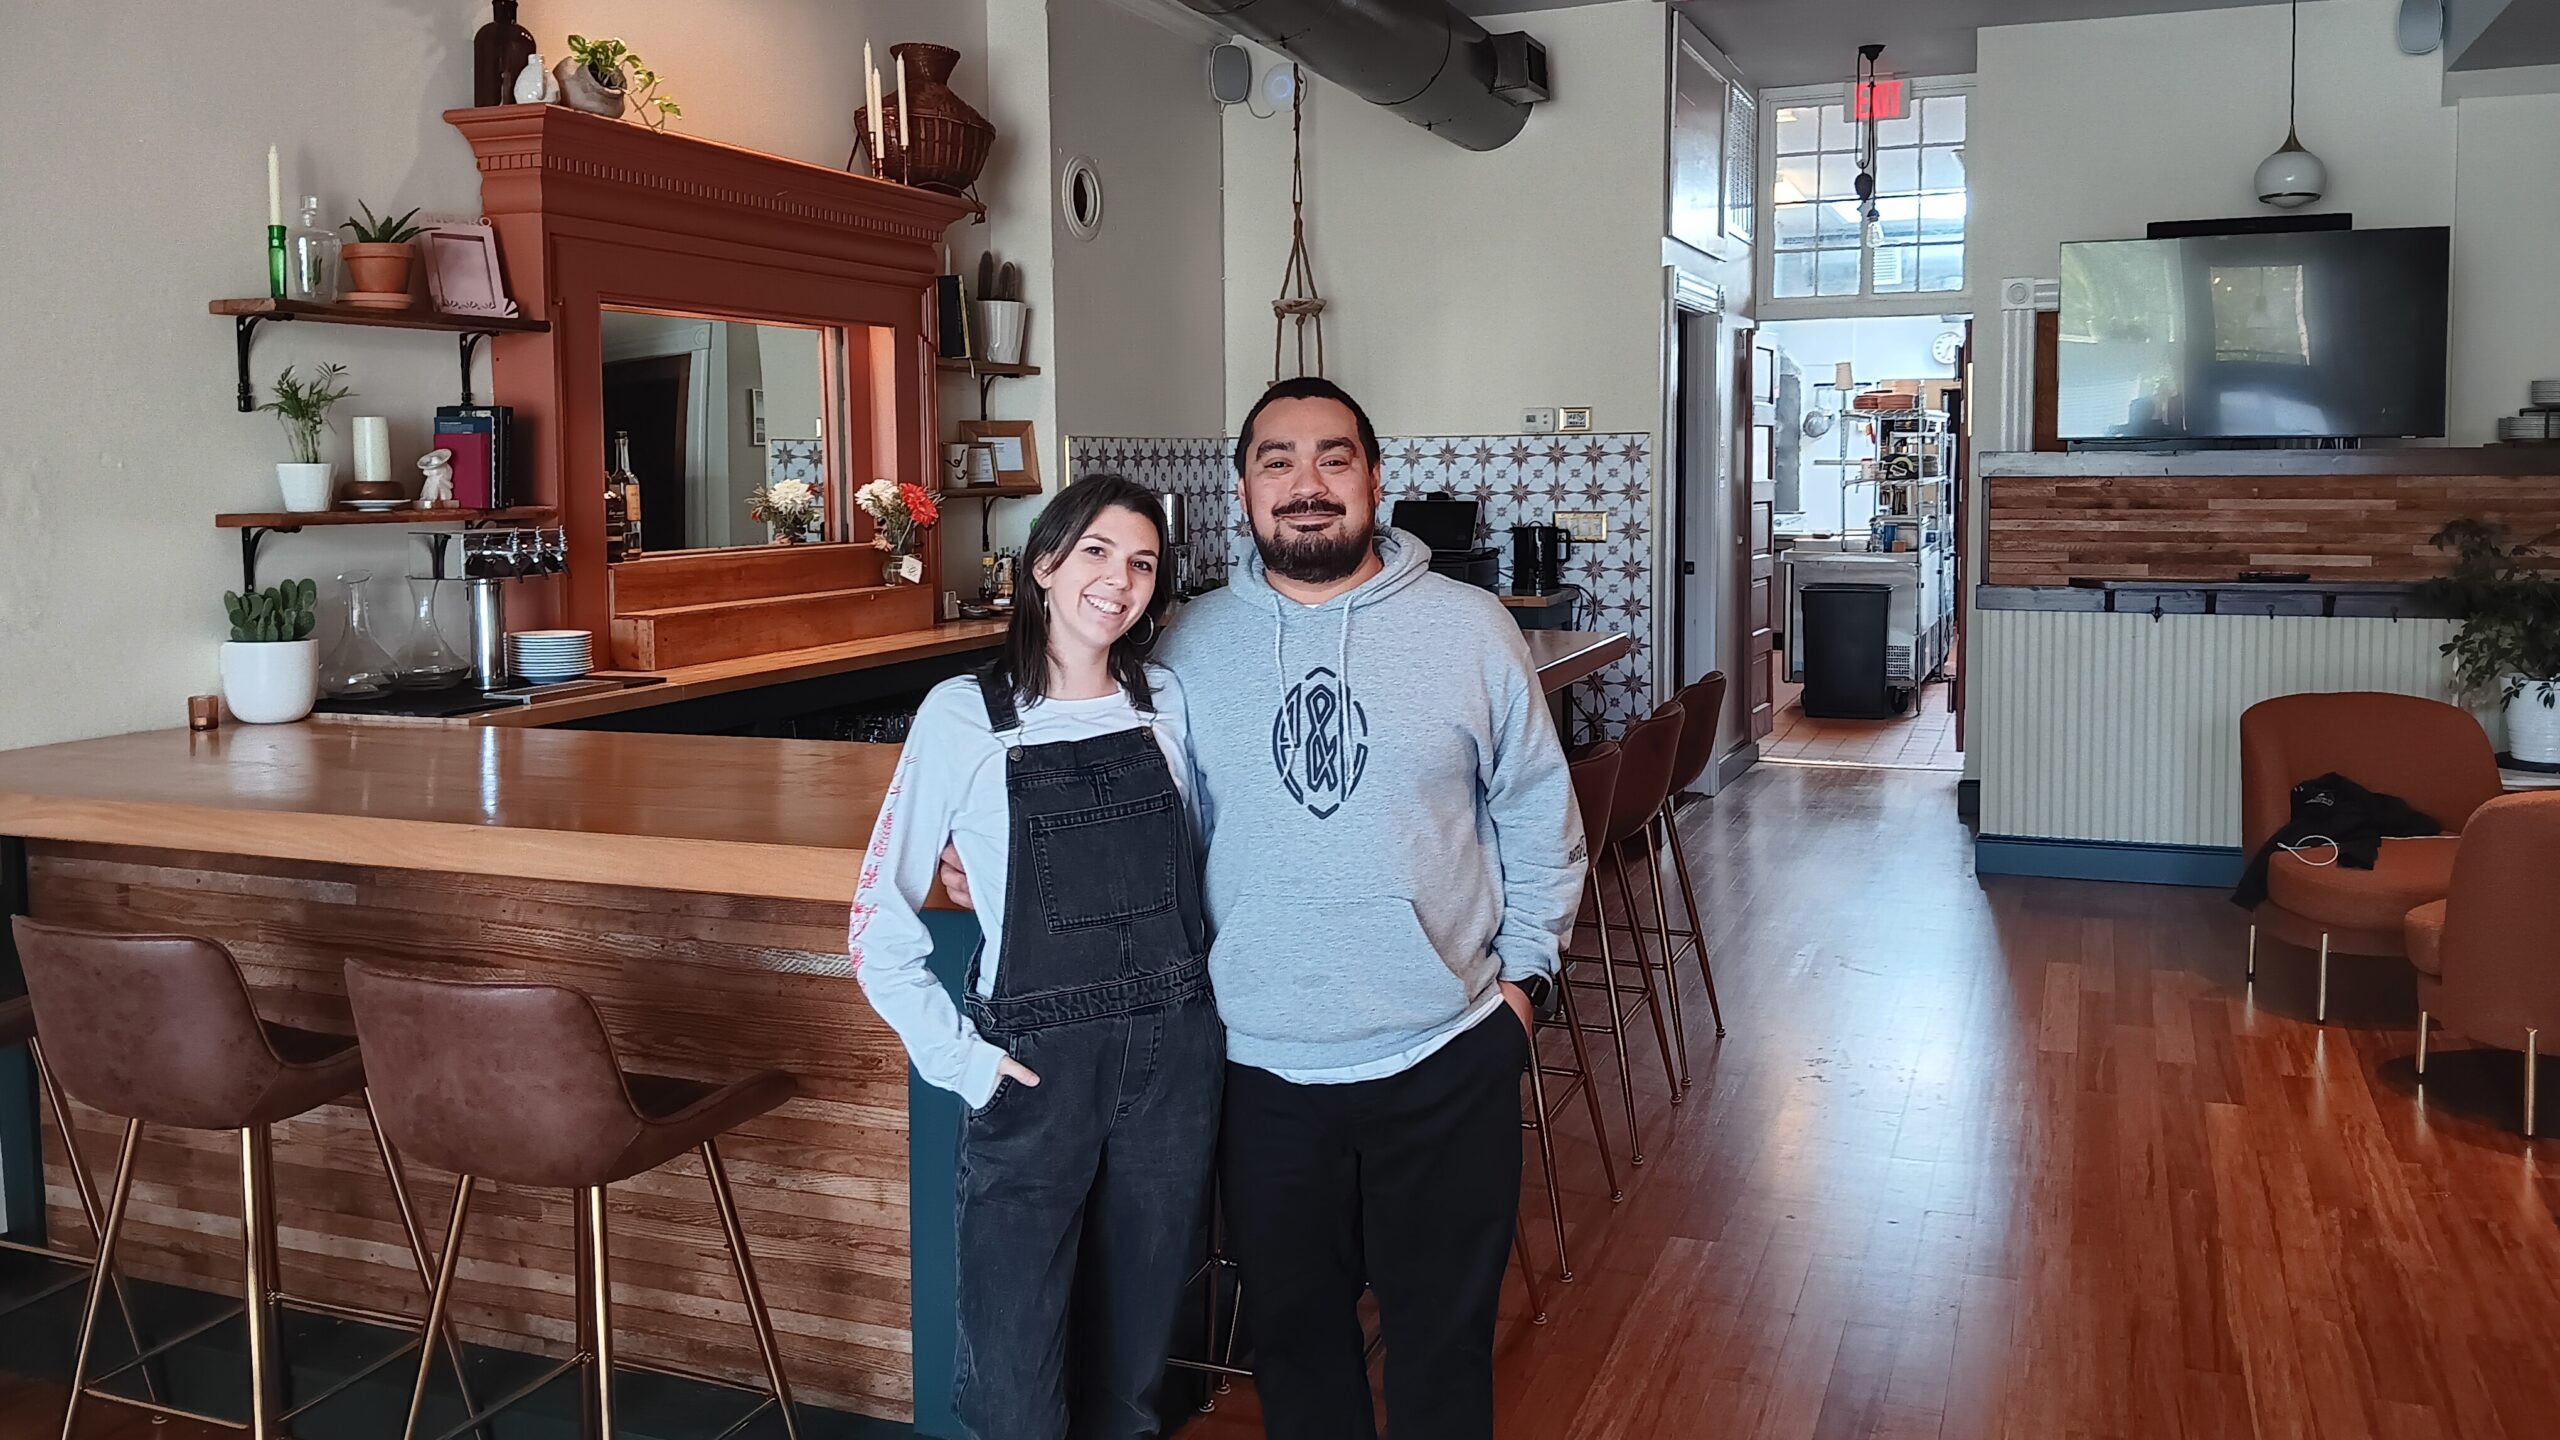 Sincero restaurant takes over former Lucy’s spot in Jackson Ward